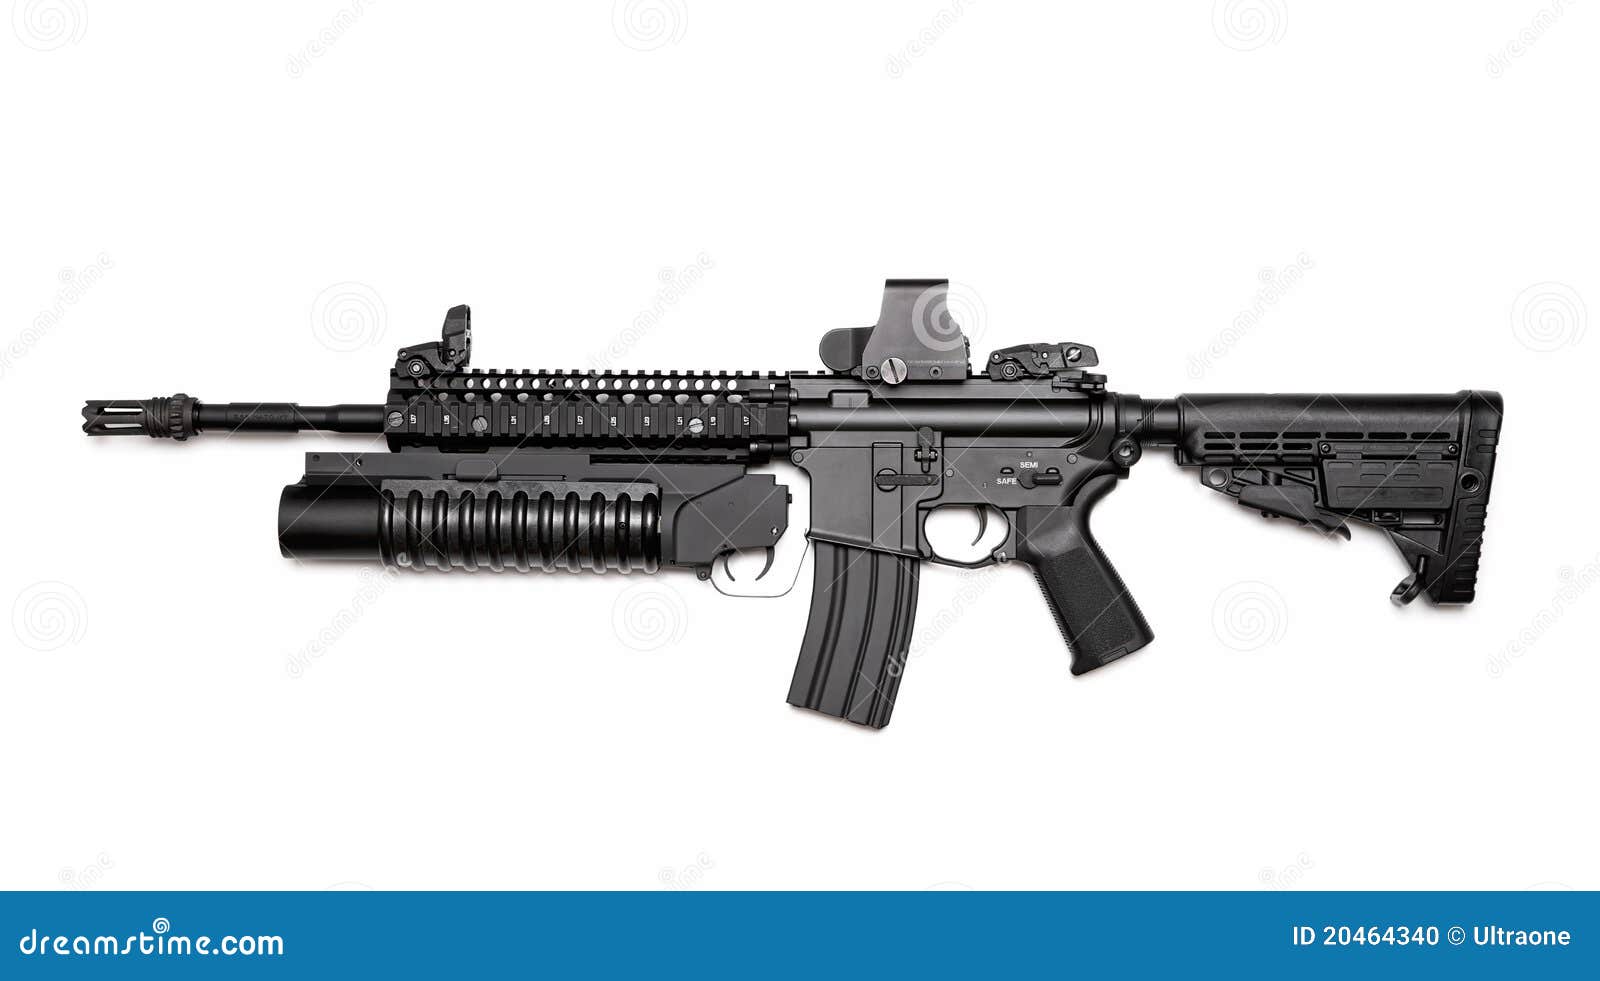 m4a1 assault rifle with grenade launcher